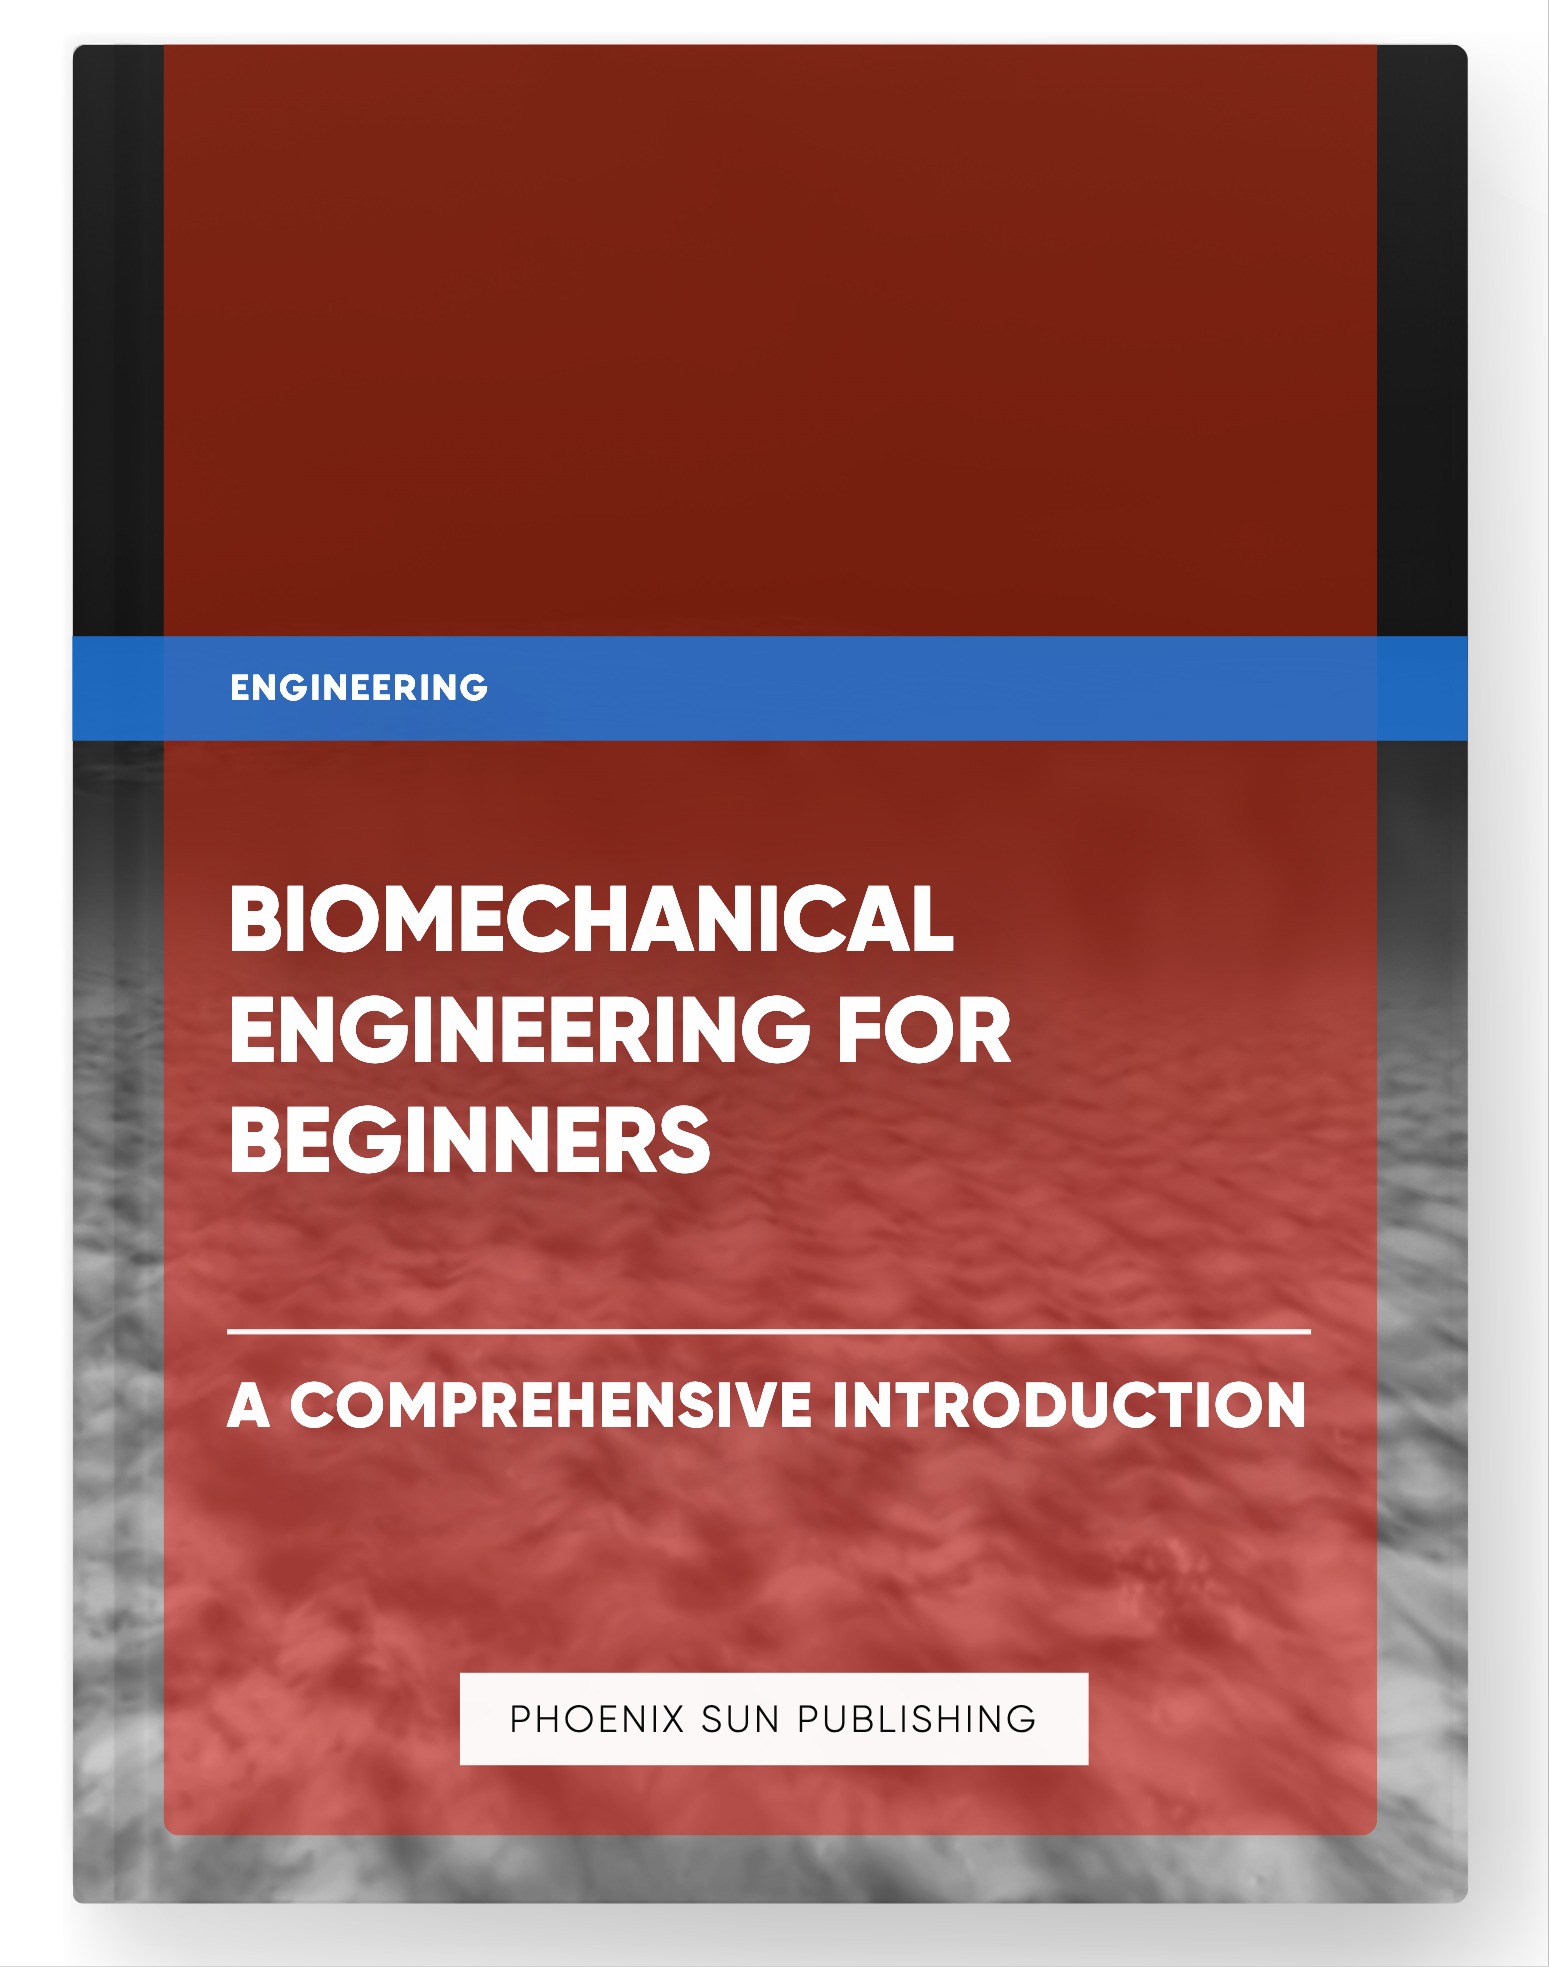 Biomechanical Engineering for Beginners – A Comprehensive Introduction